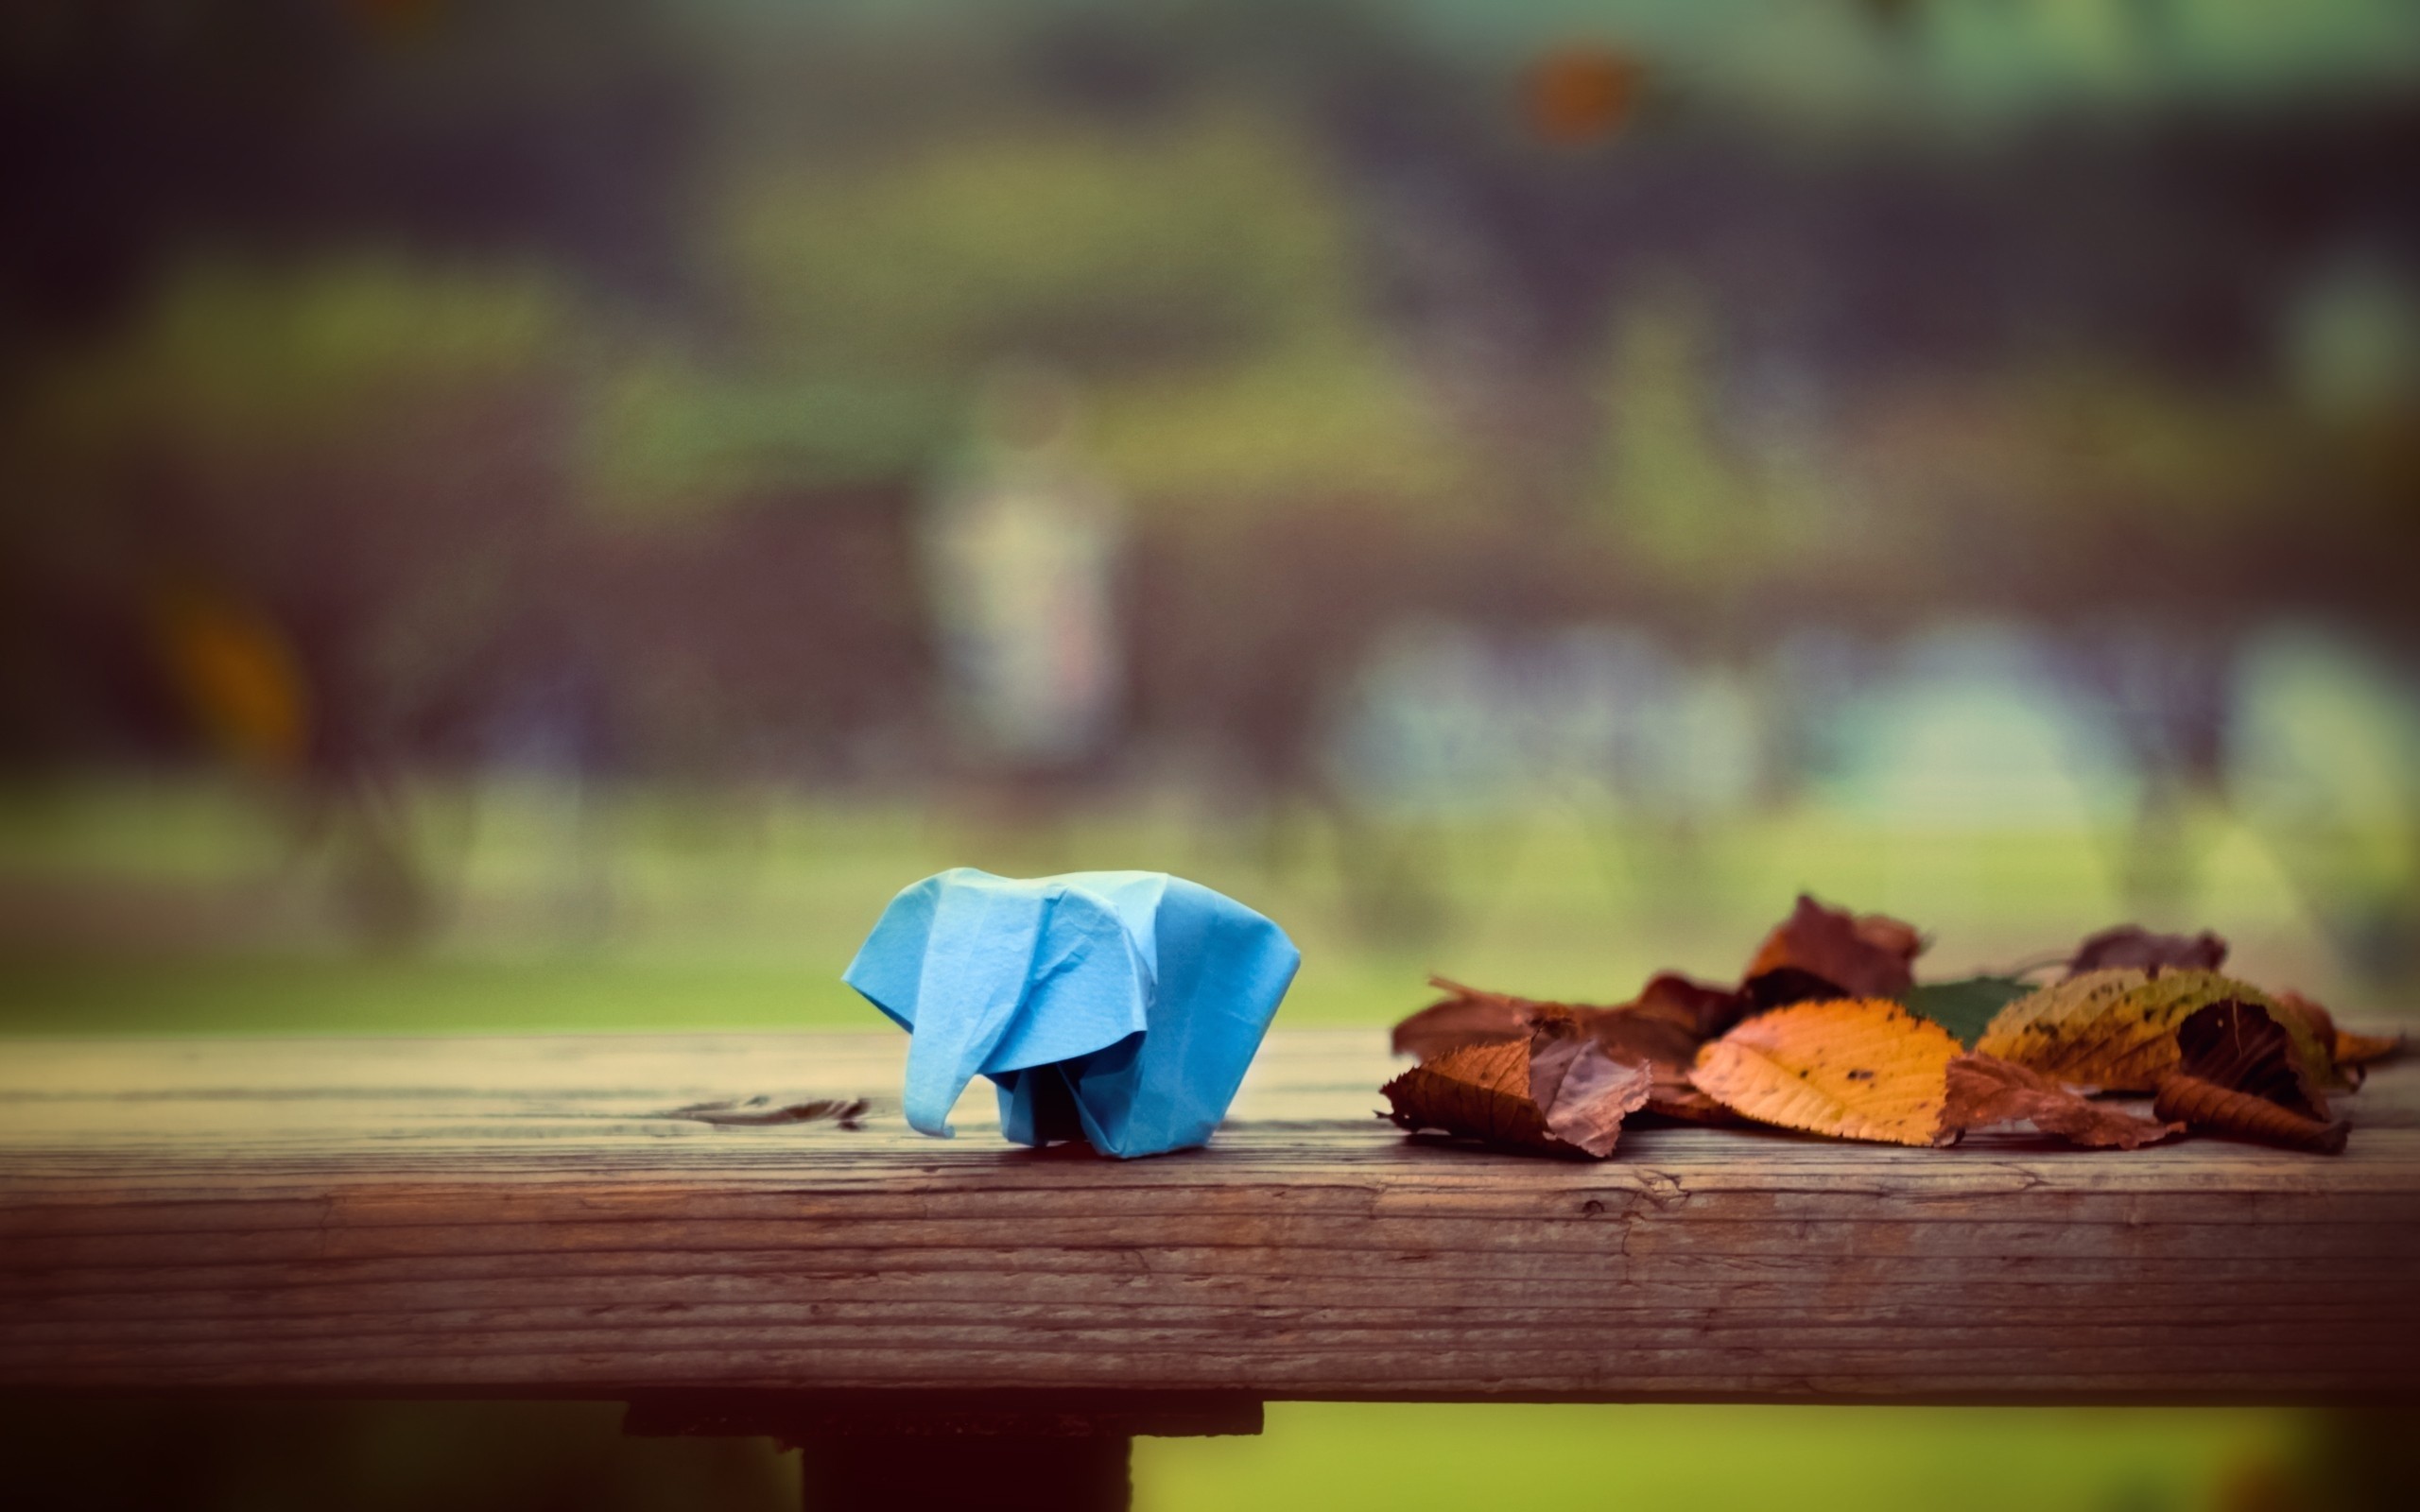 General 2560x1600 leaves fall depth of field animals origami elephant table trees park wood closeup